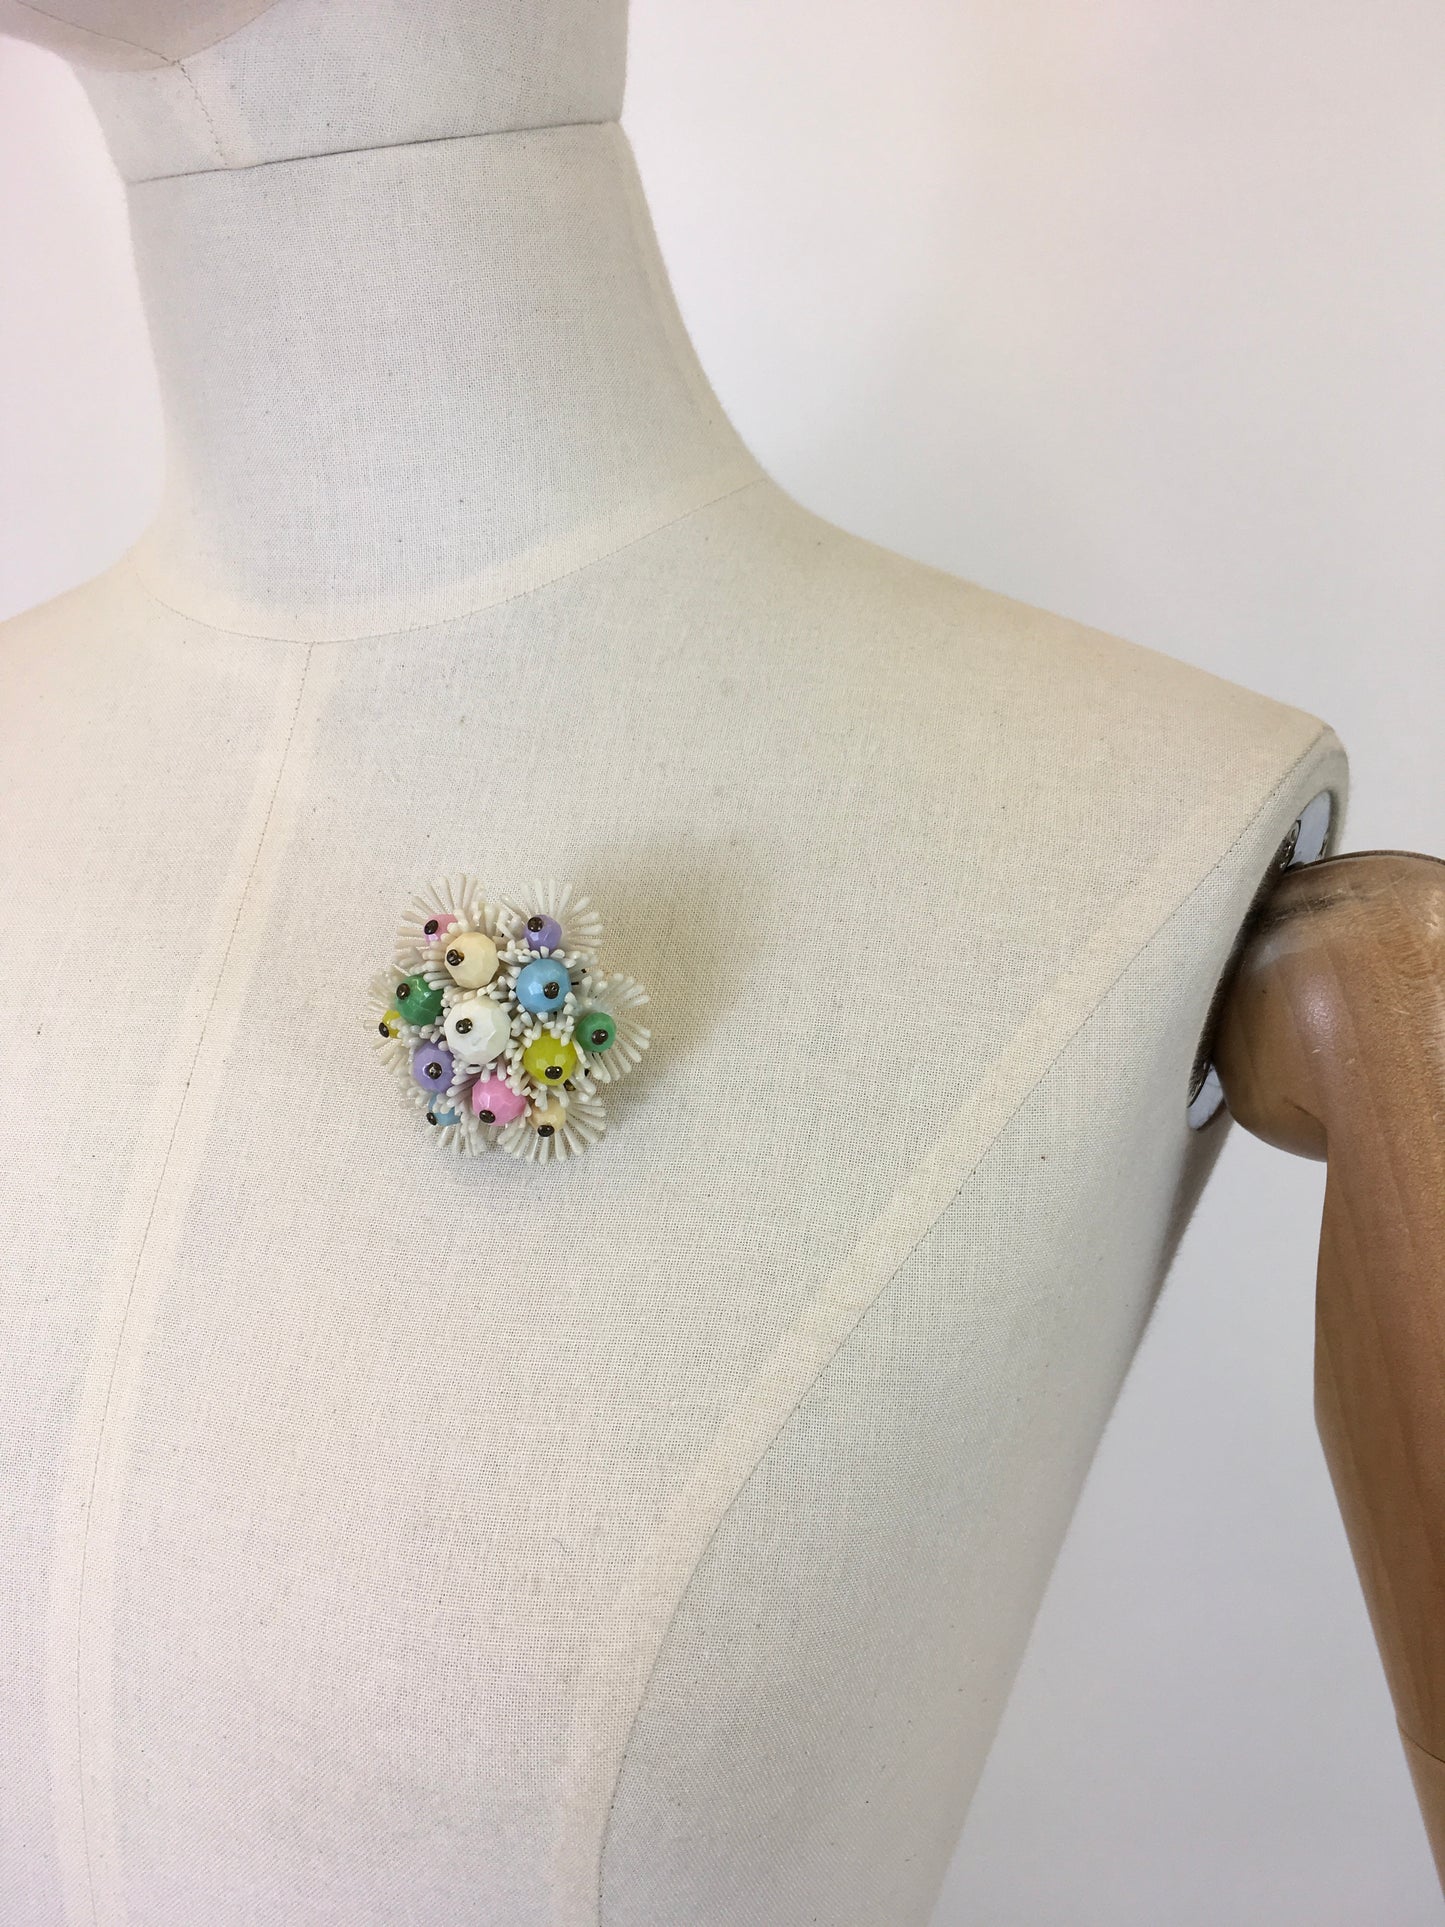 Original 1950’s Plastic and Beaded Brooch - In Pastel Pops of Pink, Green, Purple, Blue and White